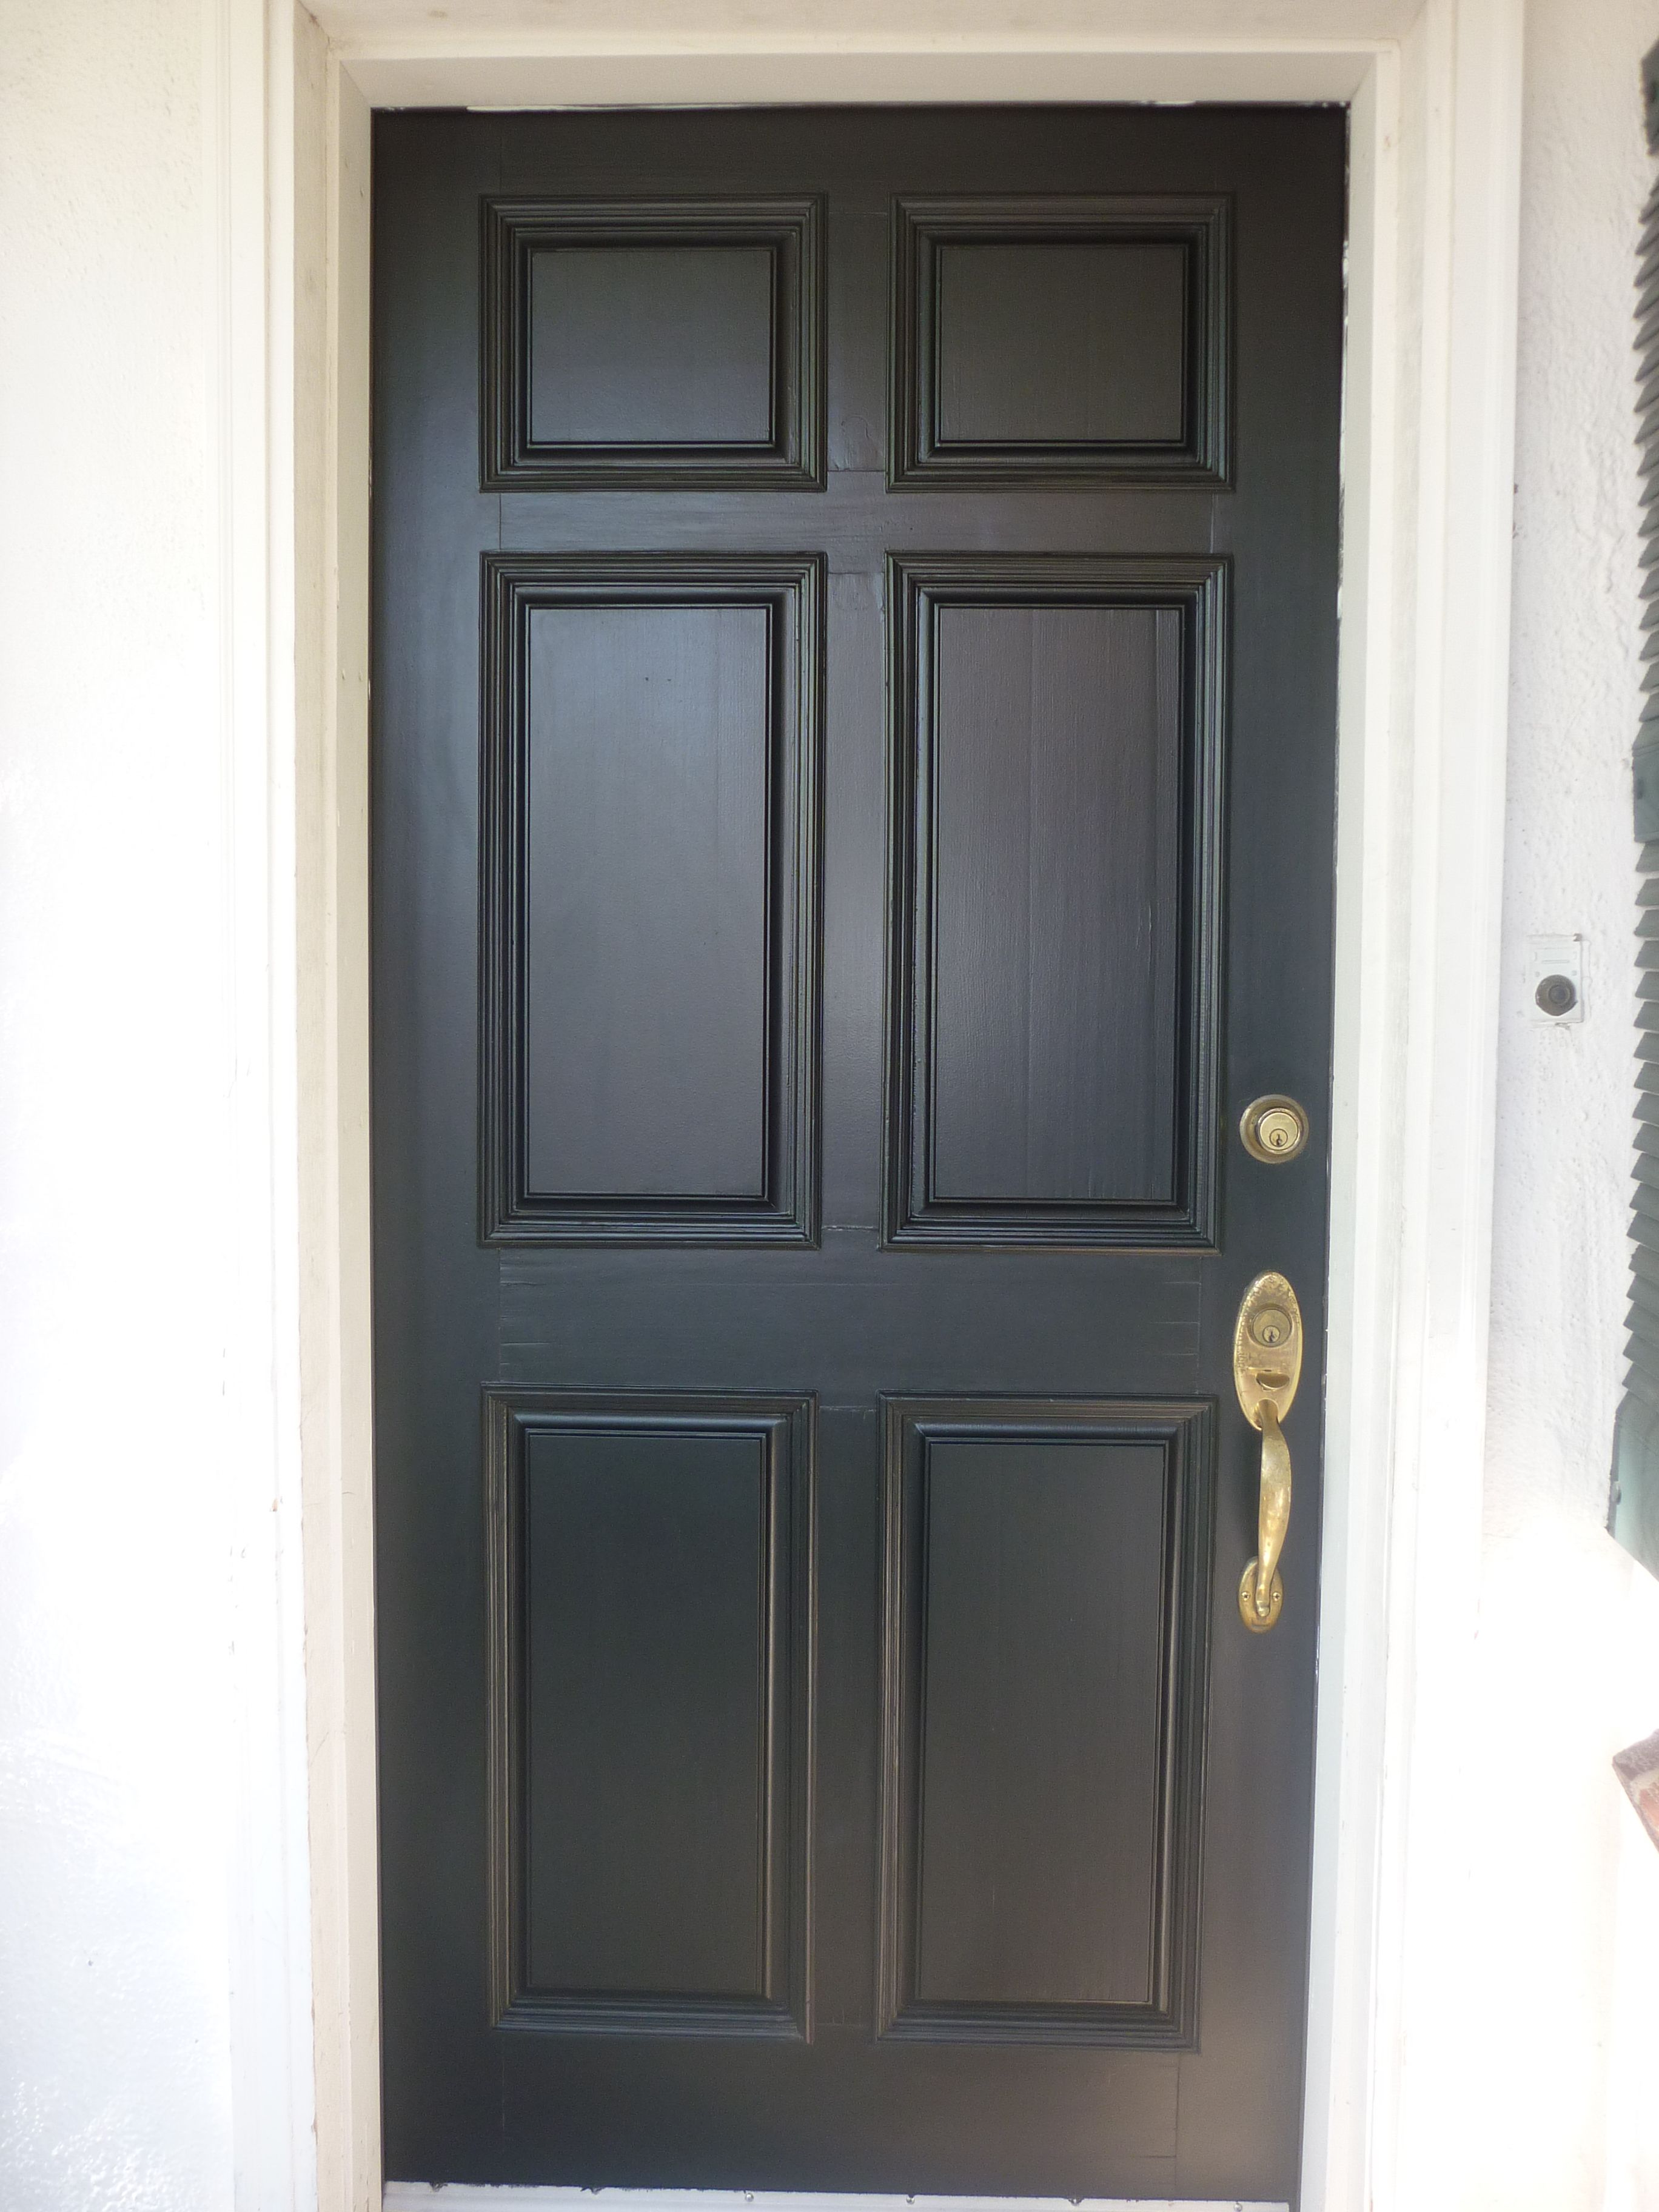 There's Just Something About a Black Front Door | Front doors, Doors ...